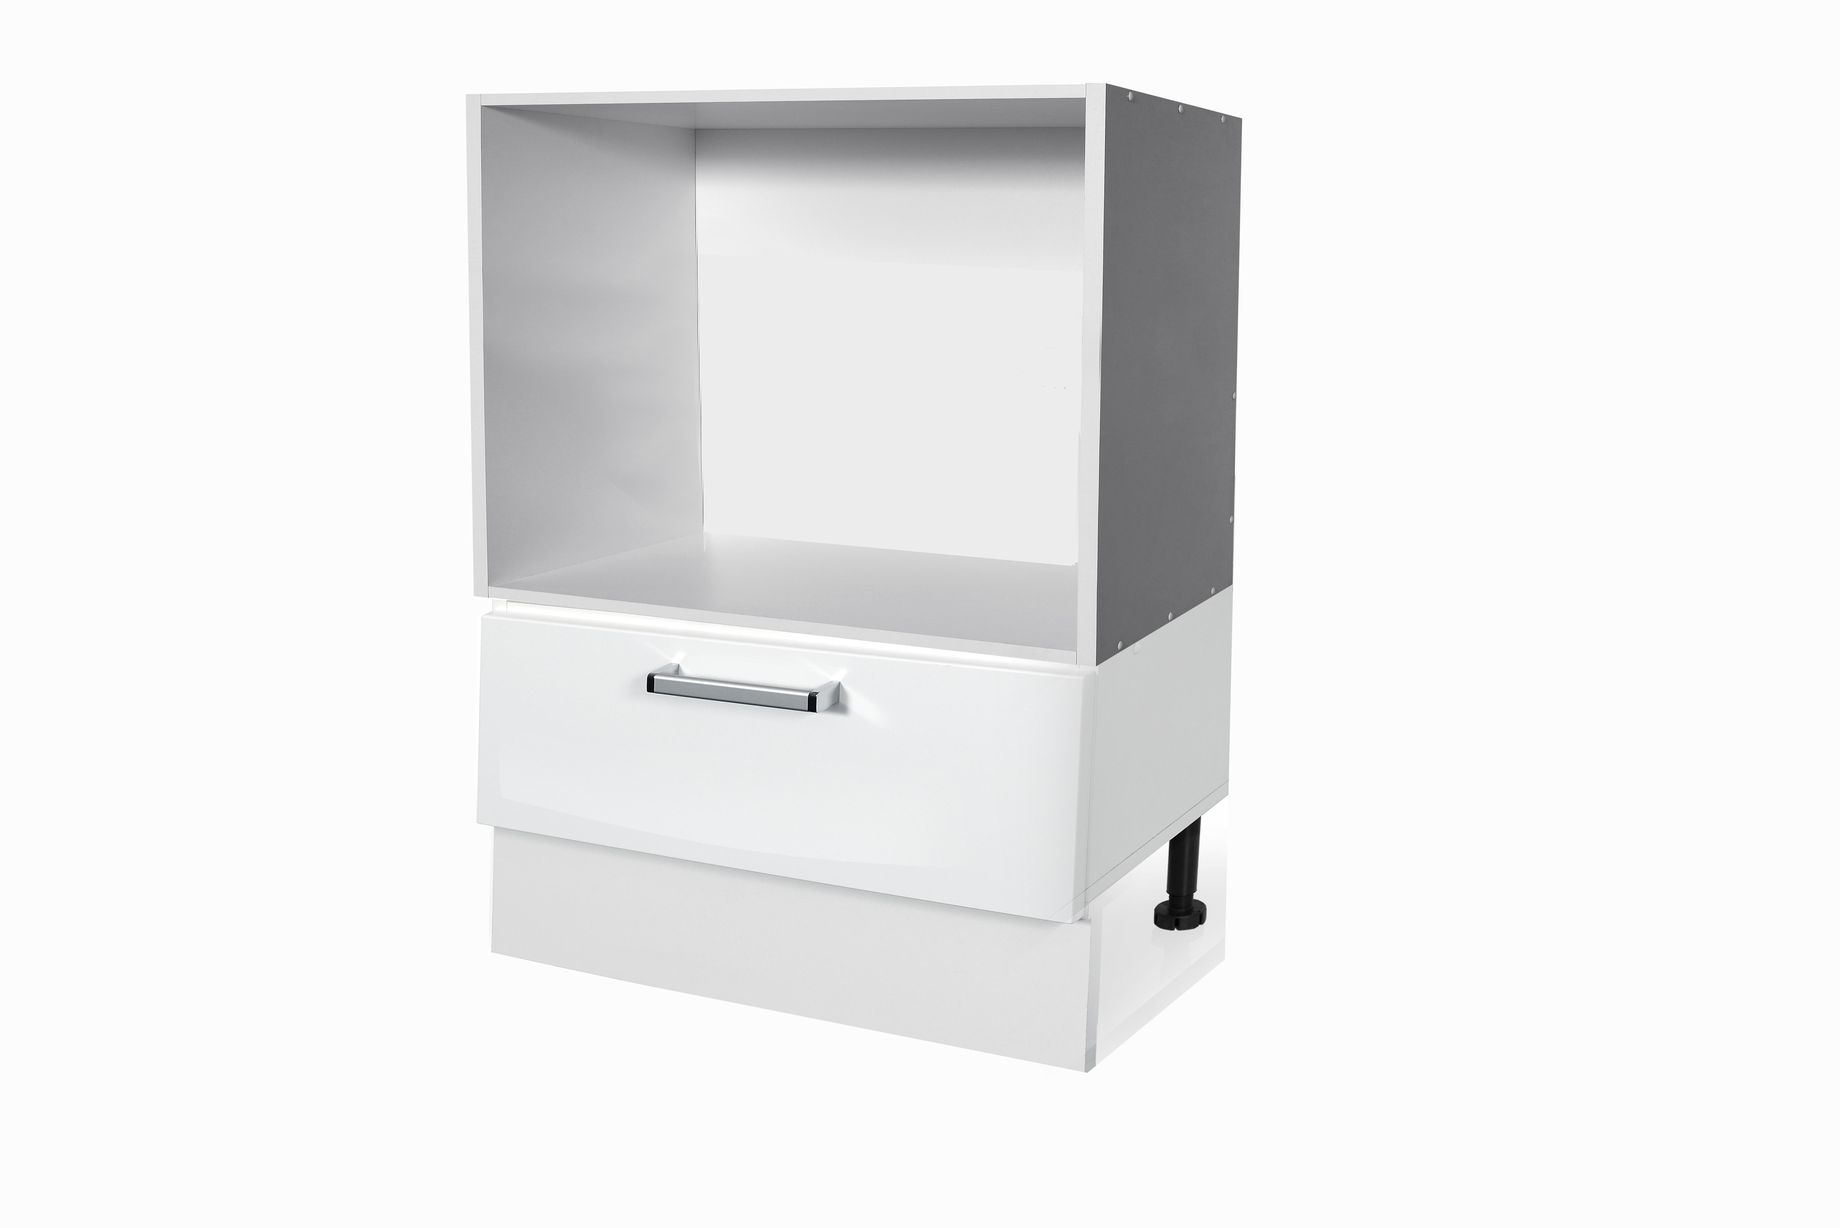 High Gloss White Base microwave cabinet for kitchen